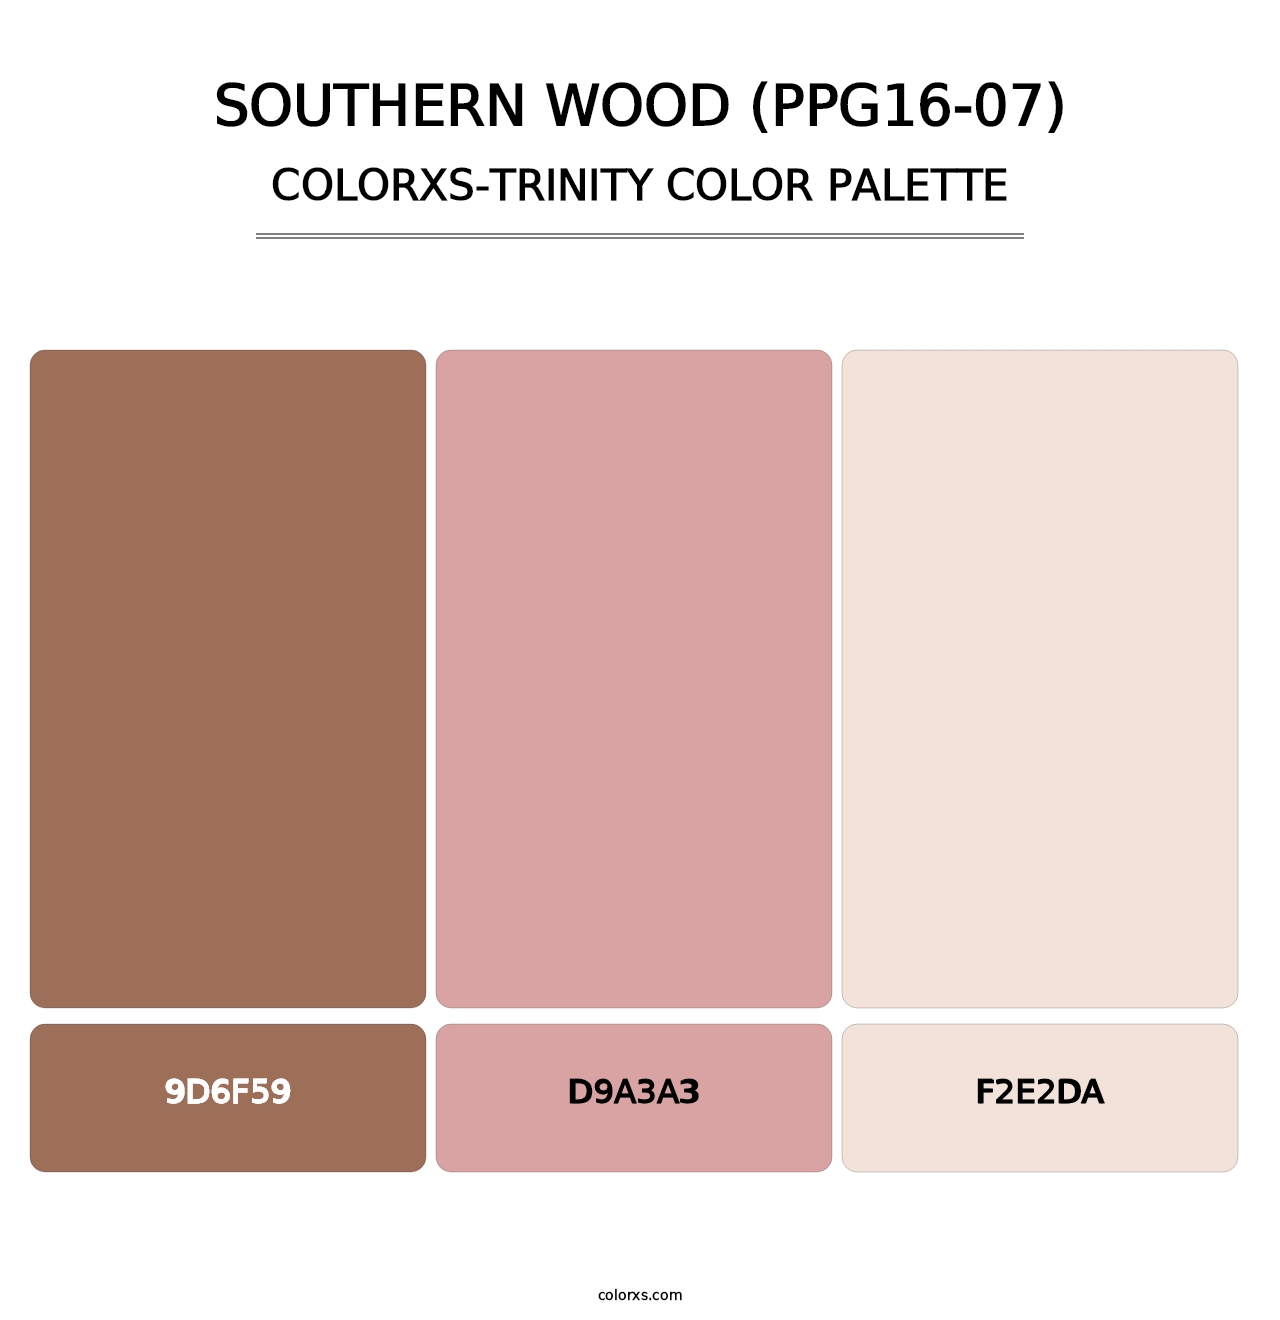 Southern Wood (PPG16-07) - Colorxs Trinity Palette